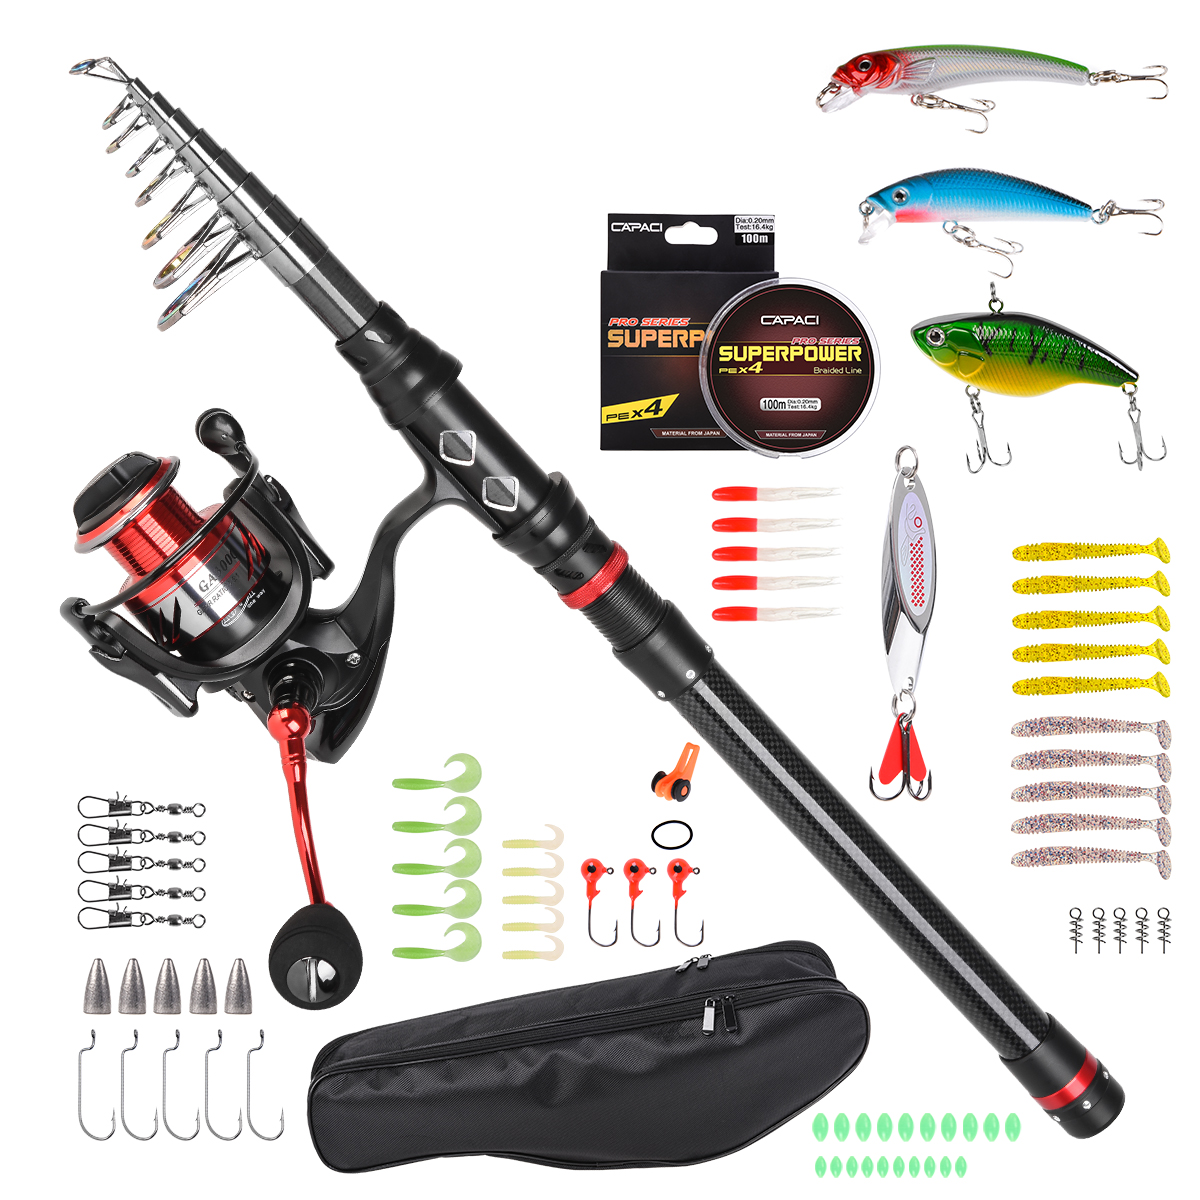 LEO Portable Fishing Rod and Reel Combos Carbon Fiber Telescopic Fishing Rod Set Come with All Accessories 64 Pcs for Travel Saltwater Freshwater Fishing